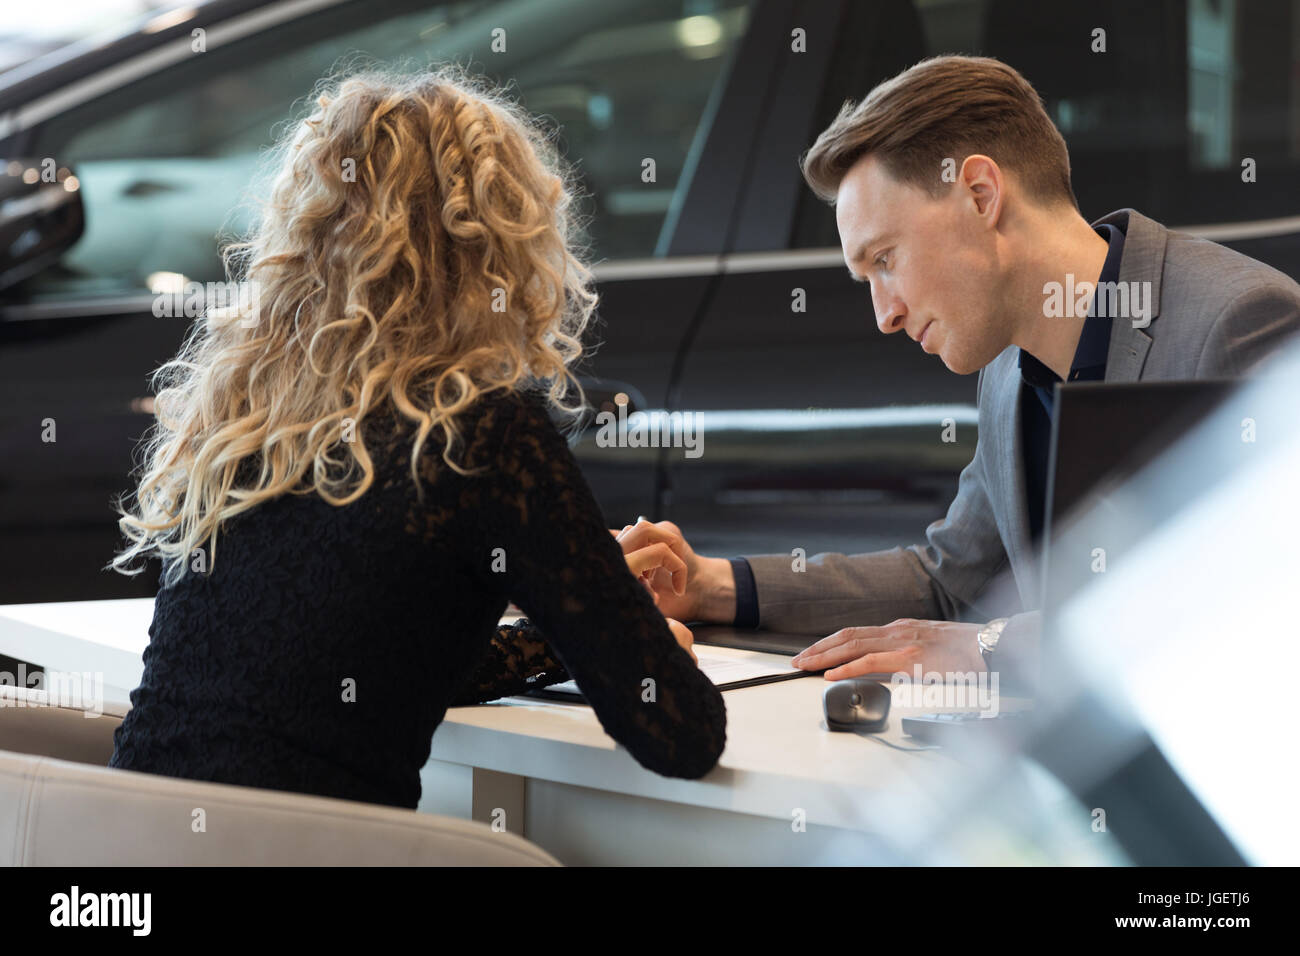 Car salesperson talking with customer in showroom Stock Photo